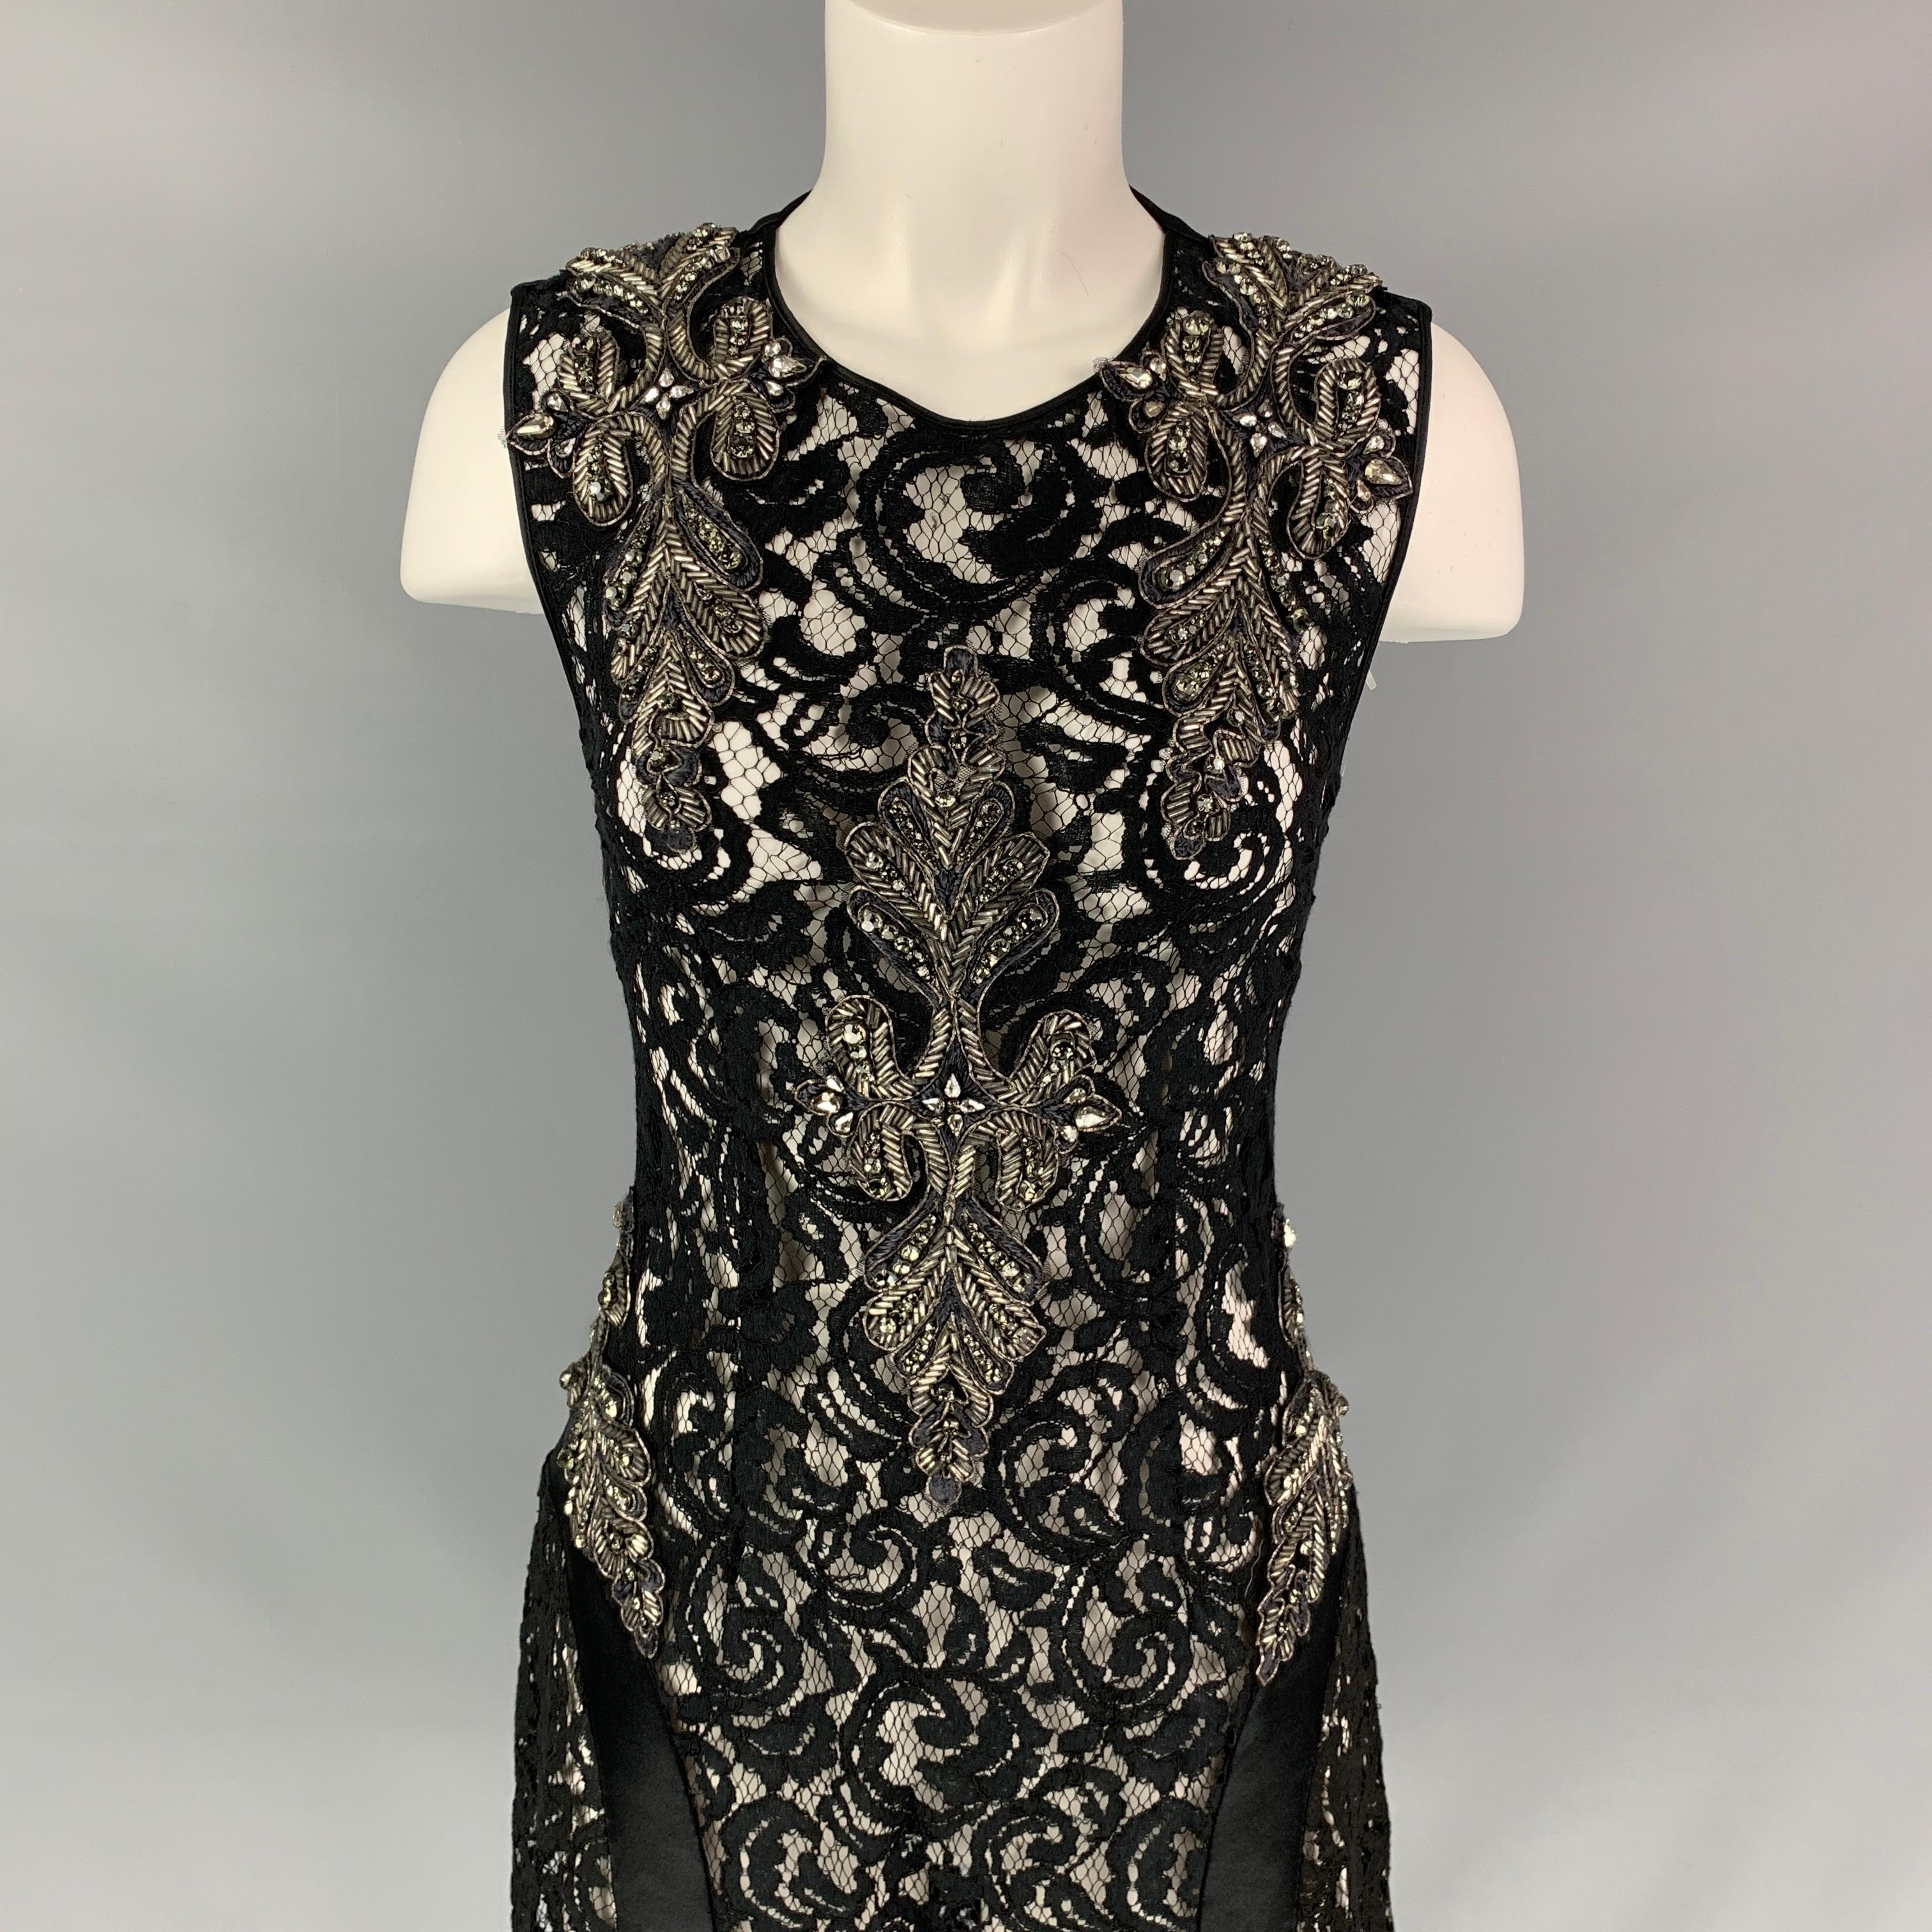 ALBERTA FERRETTI dress comes in a black lace material with a slip liner featuring a a-line style, beaded details, sleeveless, top button details, and a back zipper closure. Made in Italy. 

Very Good Pre-Owned Condition. Fabric tag removed.
Marked: